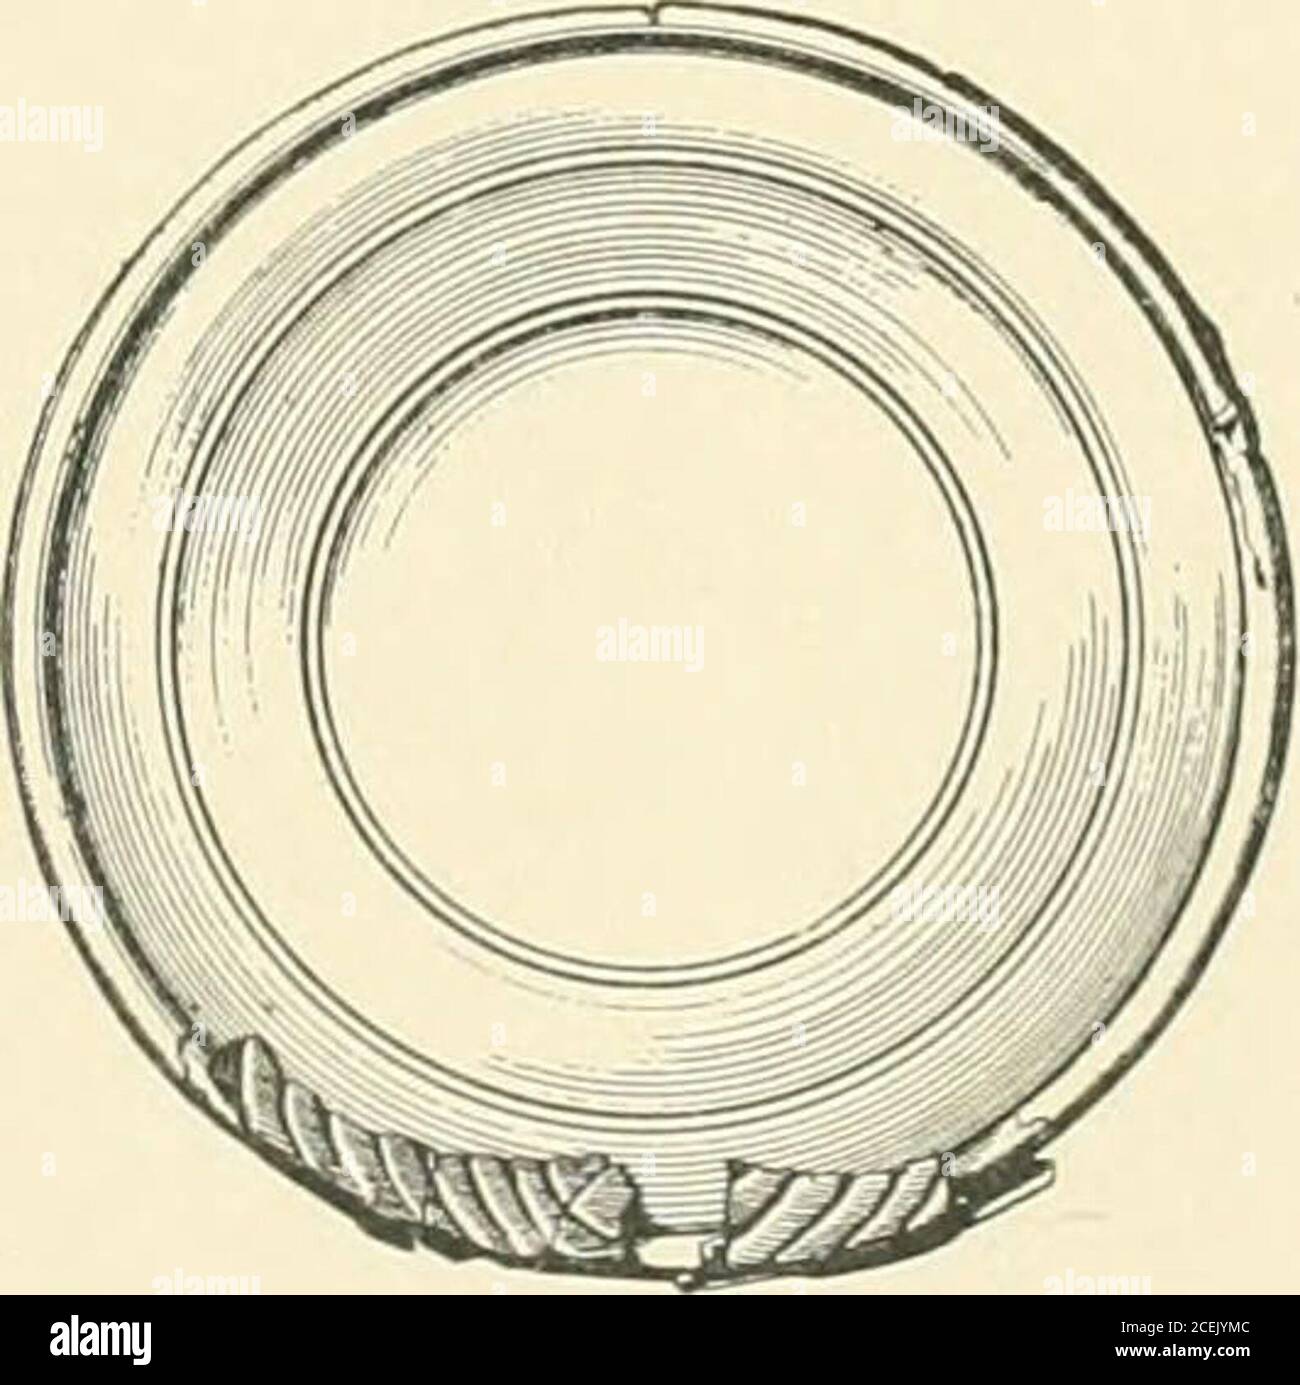 . Catalogue of the silver plate (Greek, Etruscan and Roman) in the British Museum. , No. 360, pi. 3, fig. 3 ; Gaz. Arch. 1884, p. 269 ; Furt-waengler, Ant. Gemmen, iii. p. 302 ; C. /. L. vii. 1285. Surface of bowl somewhat worn ;sides injured in two places. On the Matres see generally Roscher, Lexikon, s.v.; Haverfieldin Arch. Aeliana, N.S. xv. p. 314 and in Joiirn. Rom. Stud. ii. (1912), p. 140 ; VictoriaCounty Hist, of London, i. p. 104. One of the rings found with the trulla is also dedicatedto the Matres [B.M. Cat. of Finger-Rmgs, No. 636). 184. Mirror. Circular; handle attached by means o Stock Photo